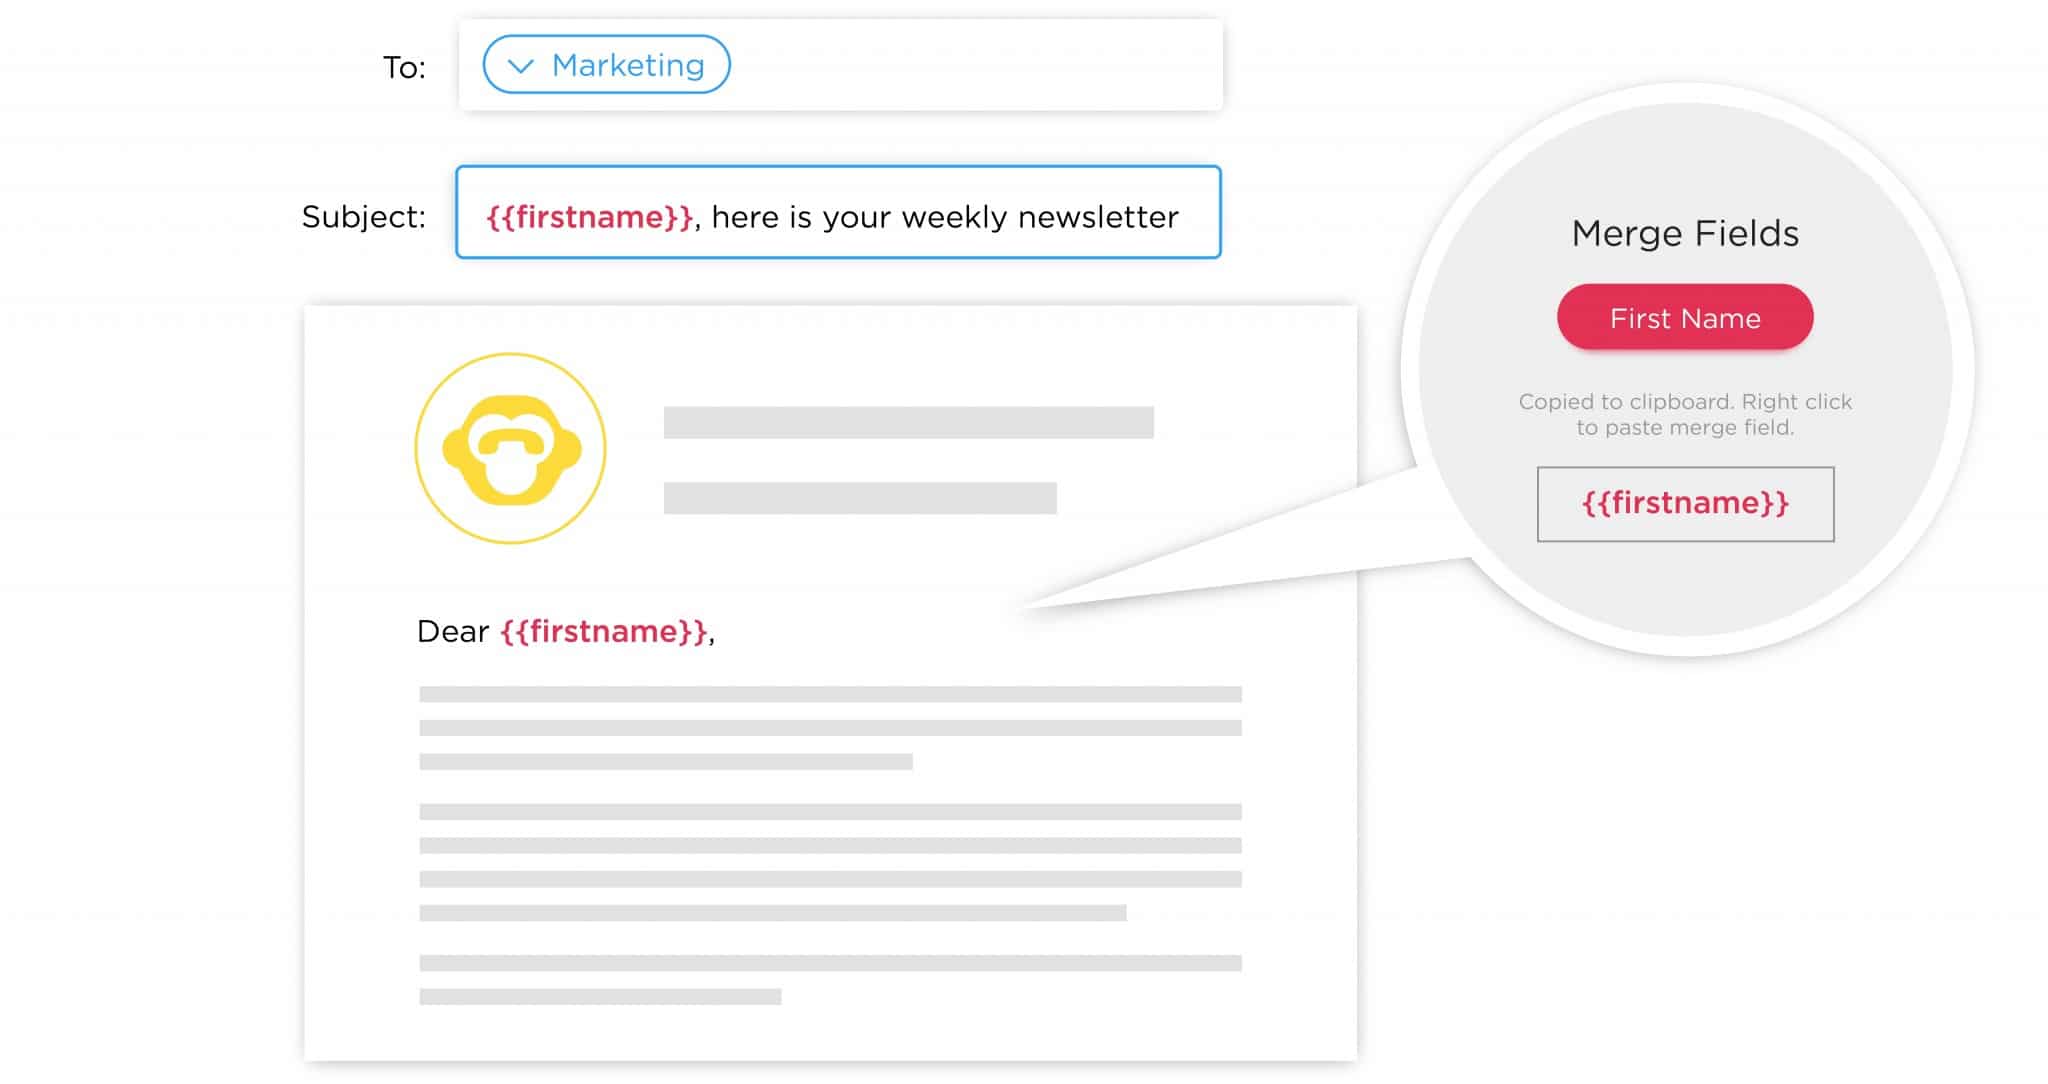 Image of merge fields being used in an email to create personalized subject lines and body copy using ContactMonkey's internal newsletter tool.